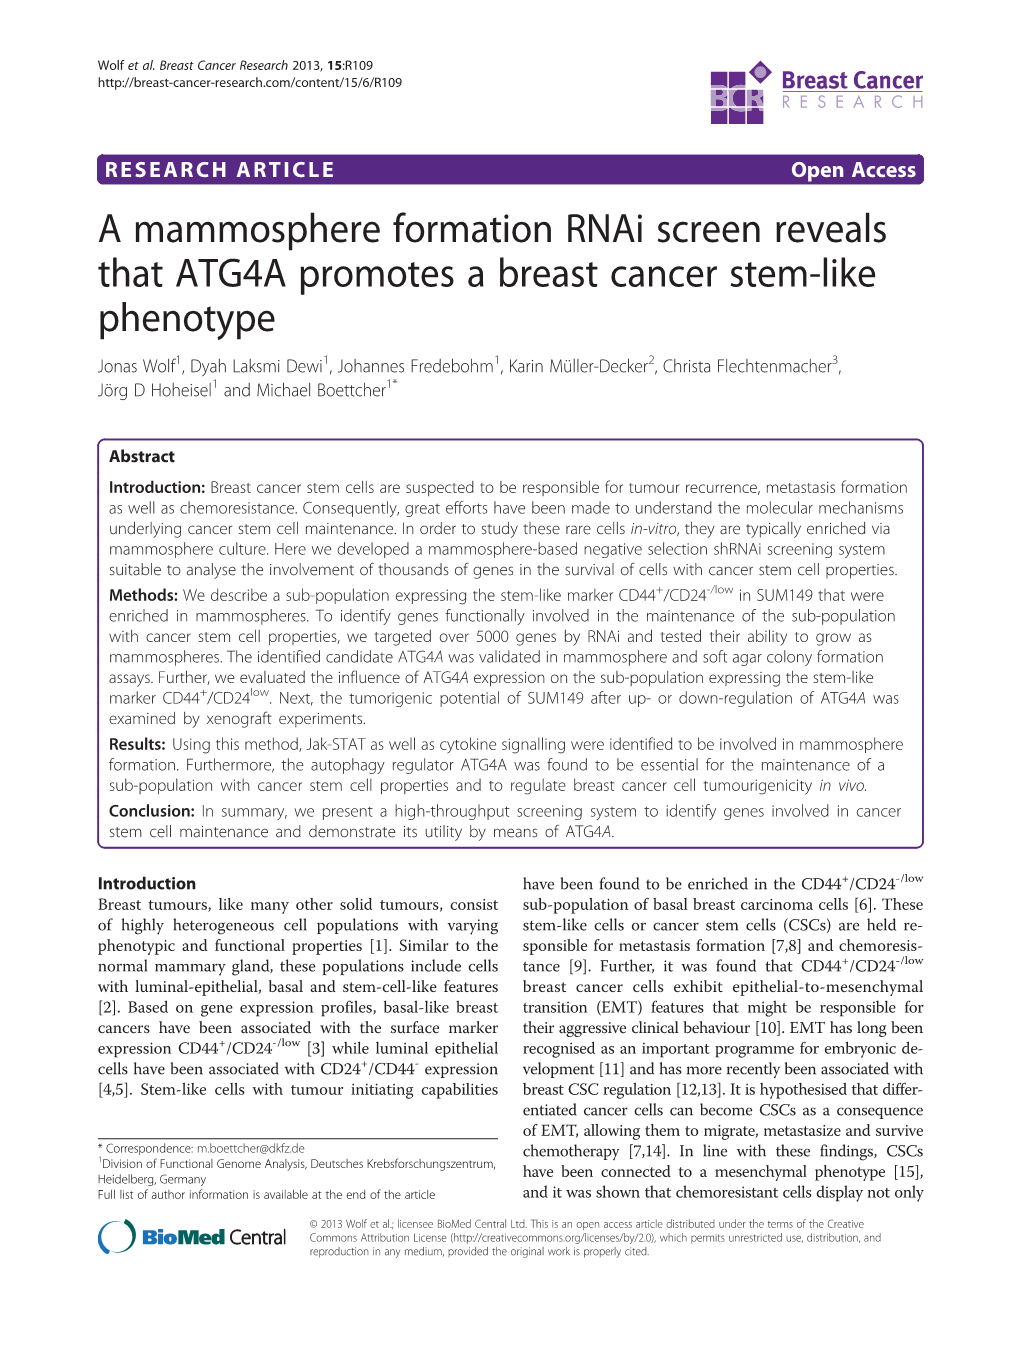 A Mammosphere Formation Rnai Screen Reveals That ATG4A